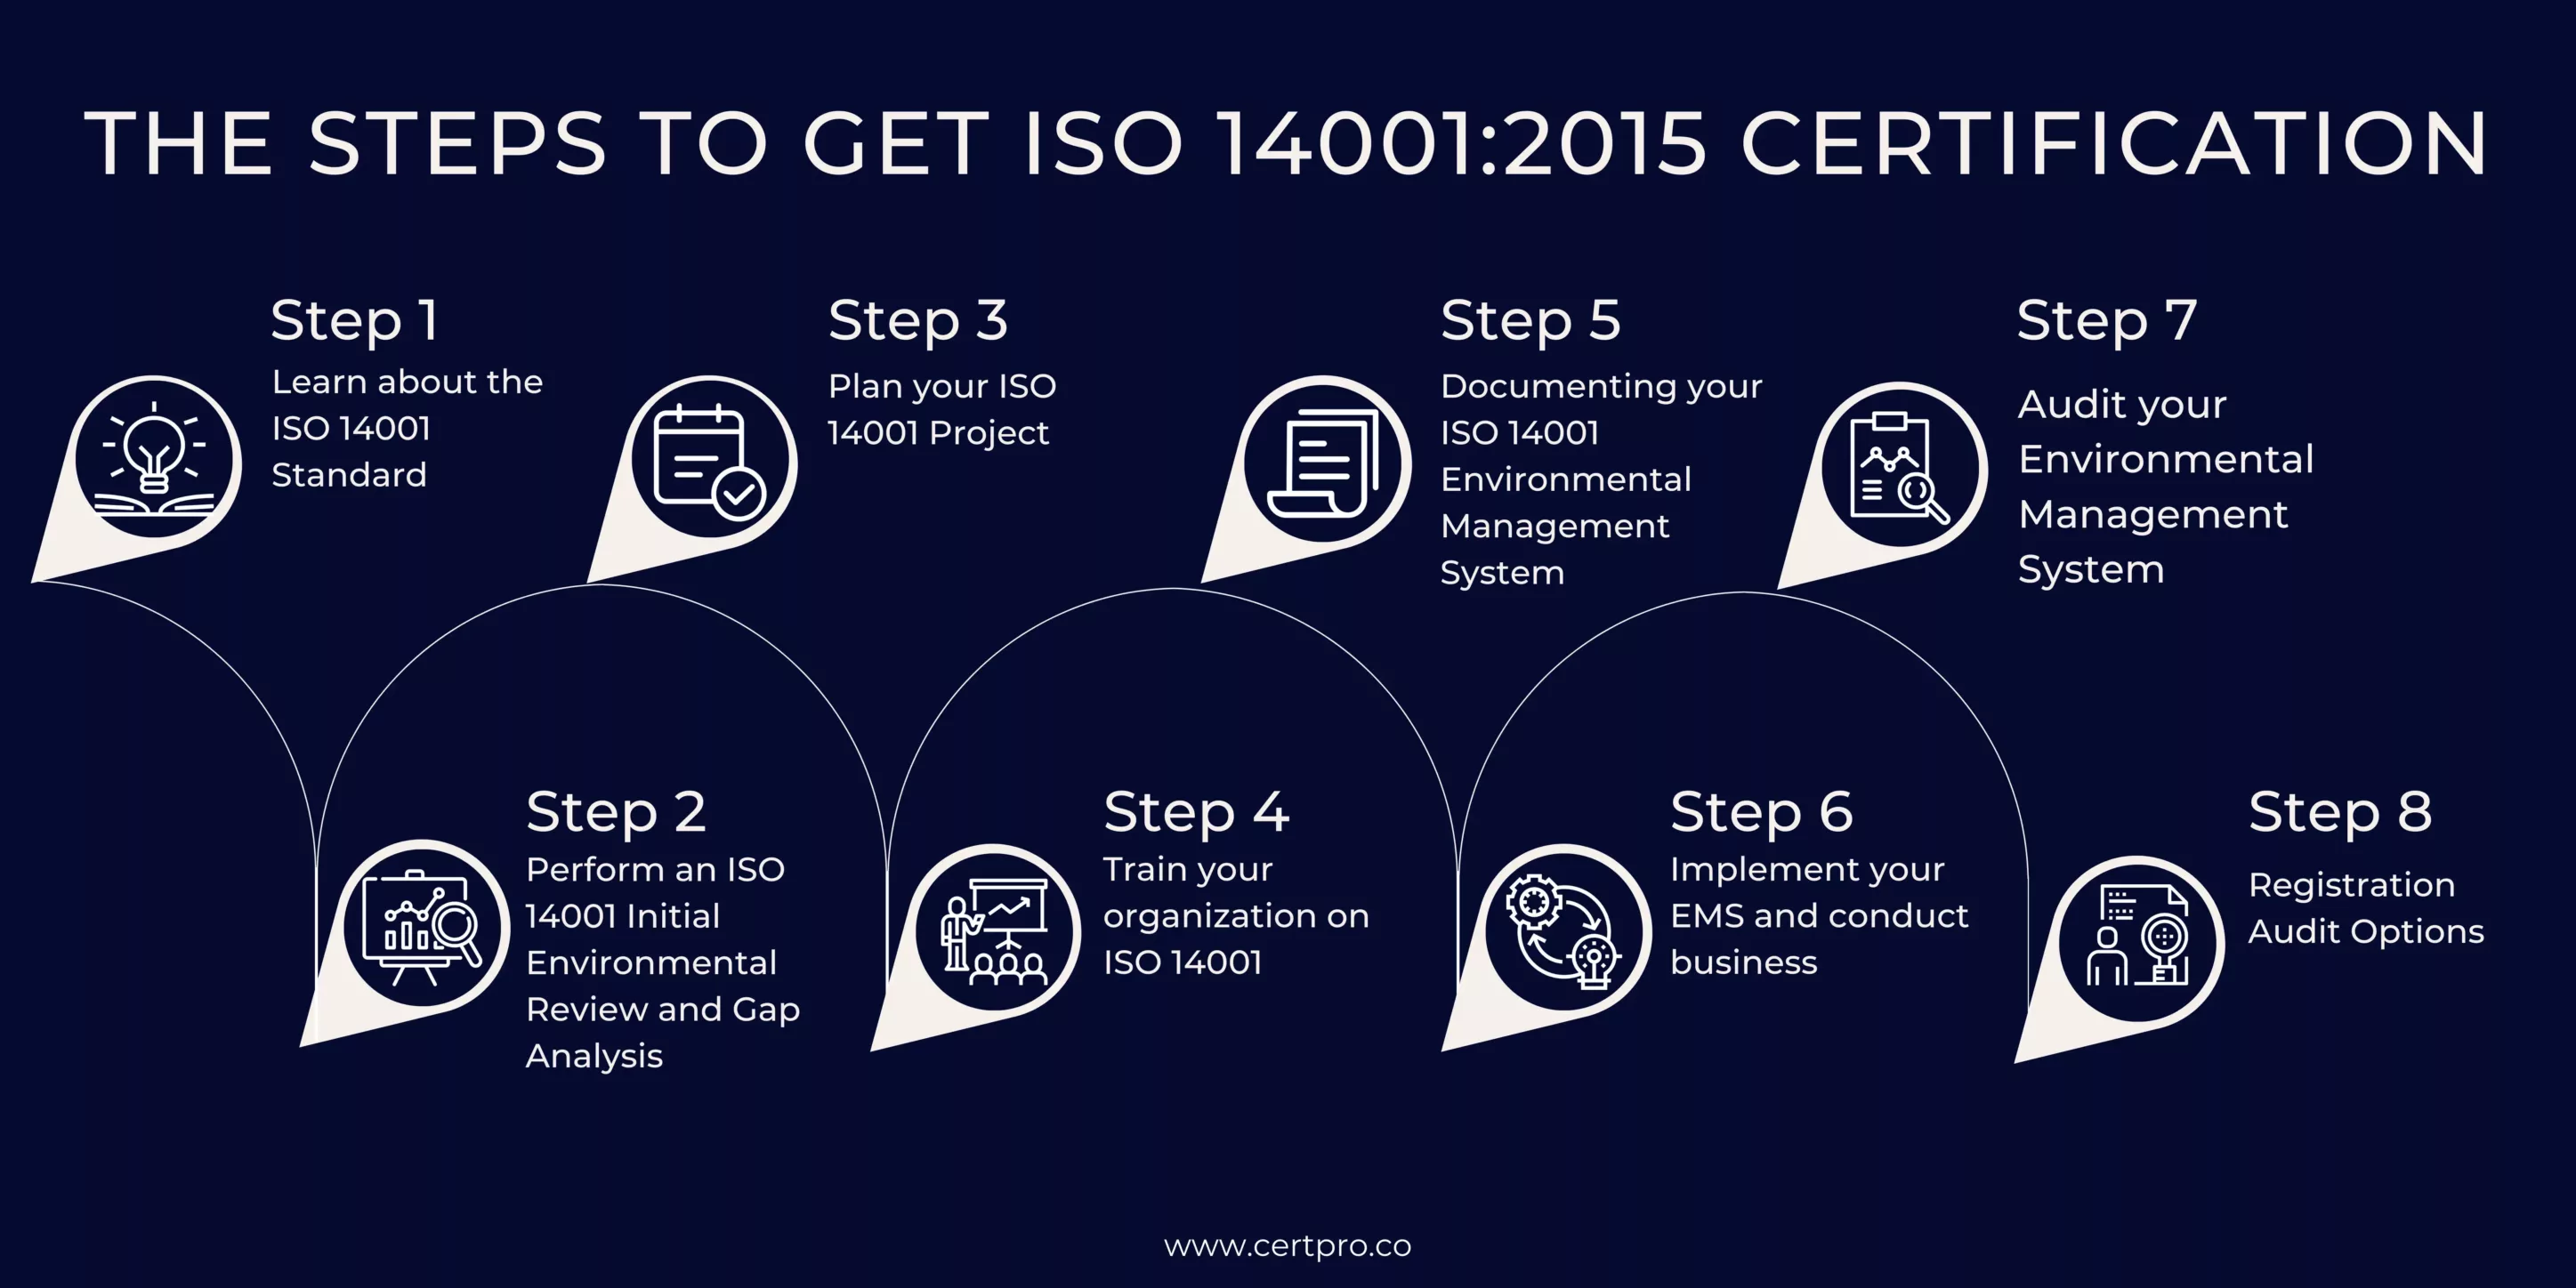 STEPS TO GET ISO 14001 2015